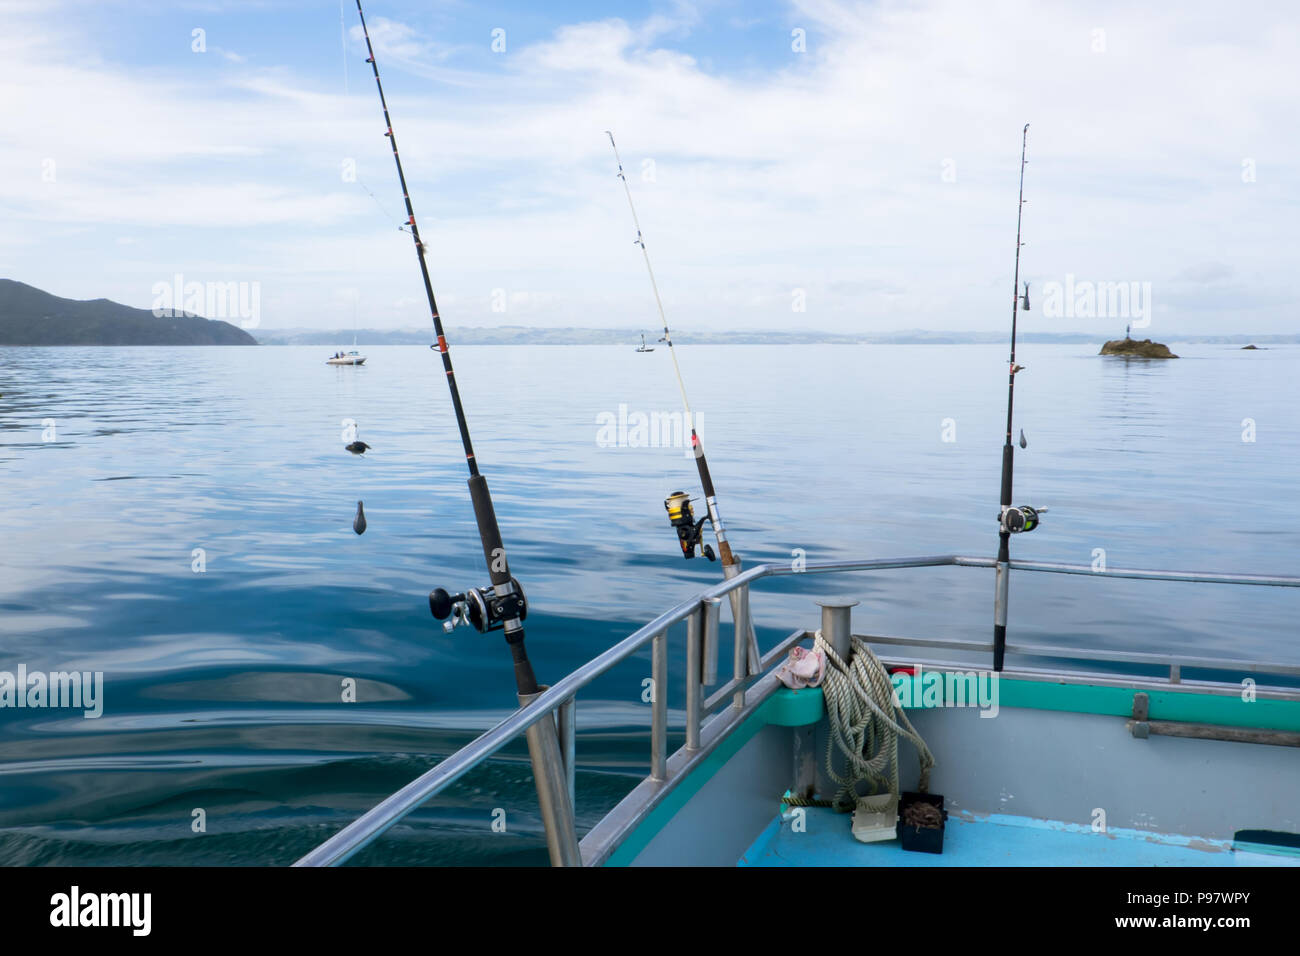 Fishing rods with reels on charter boat on tranquil day at sea in